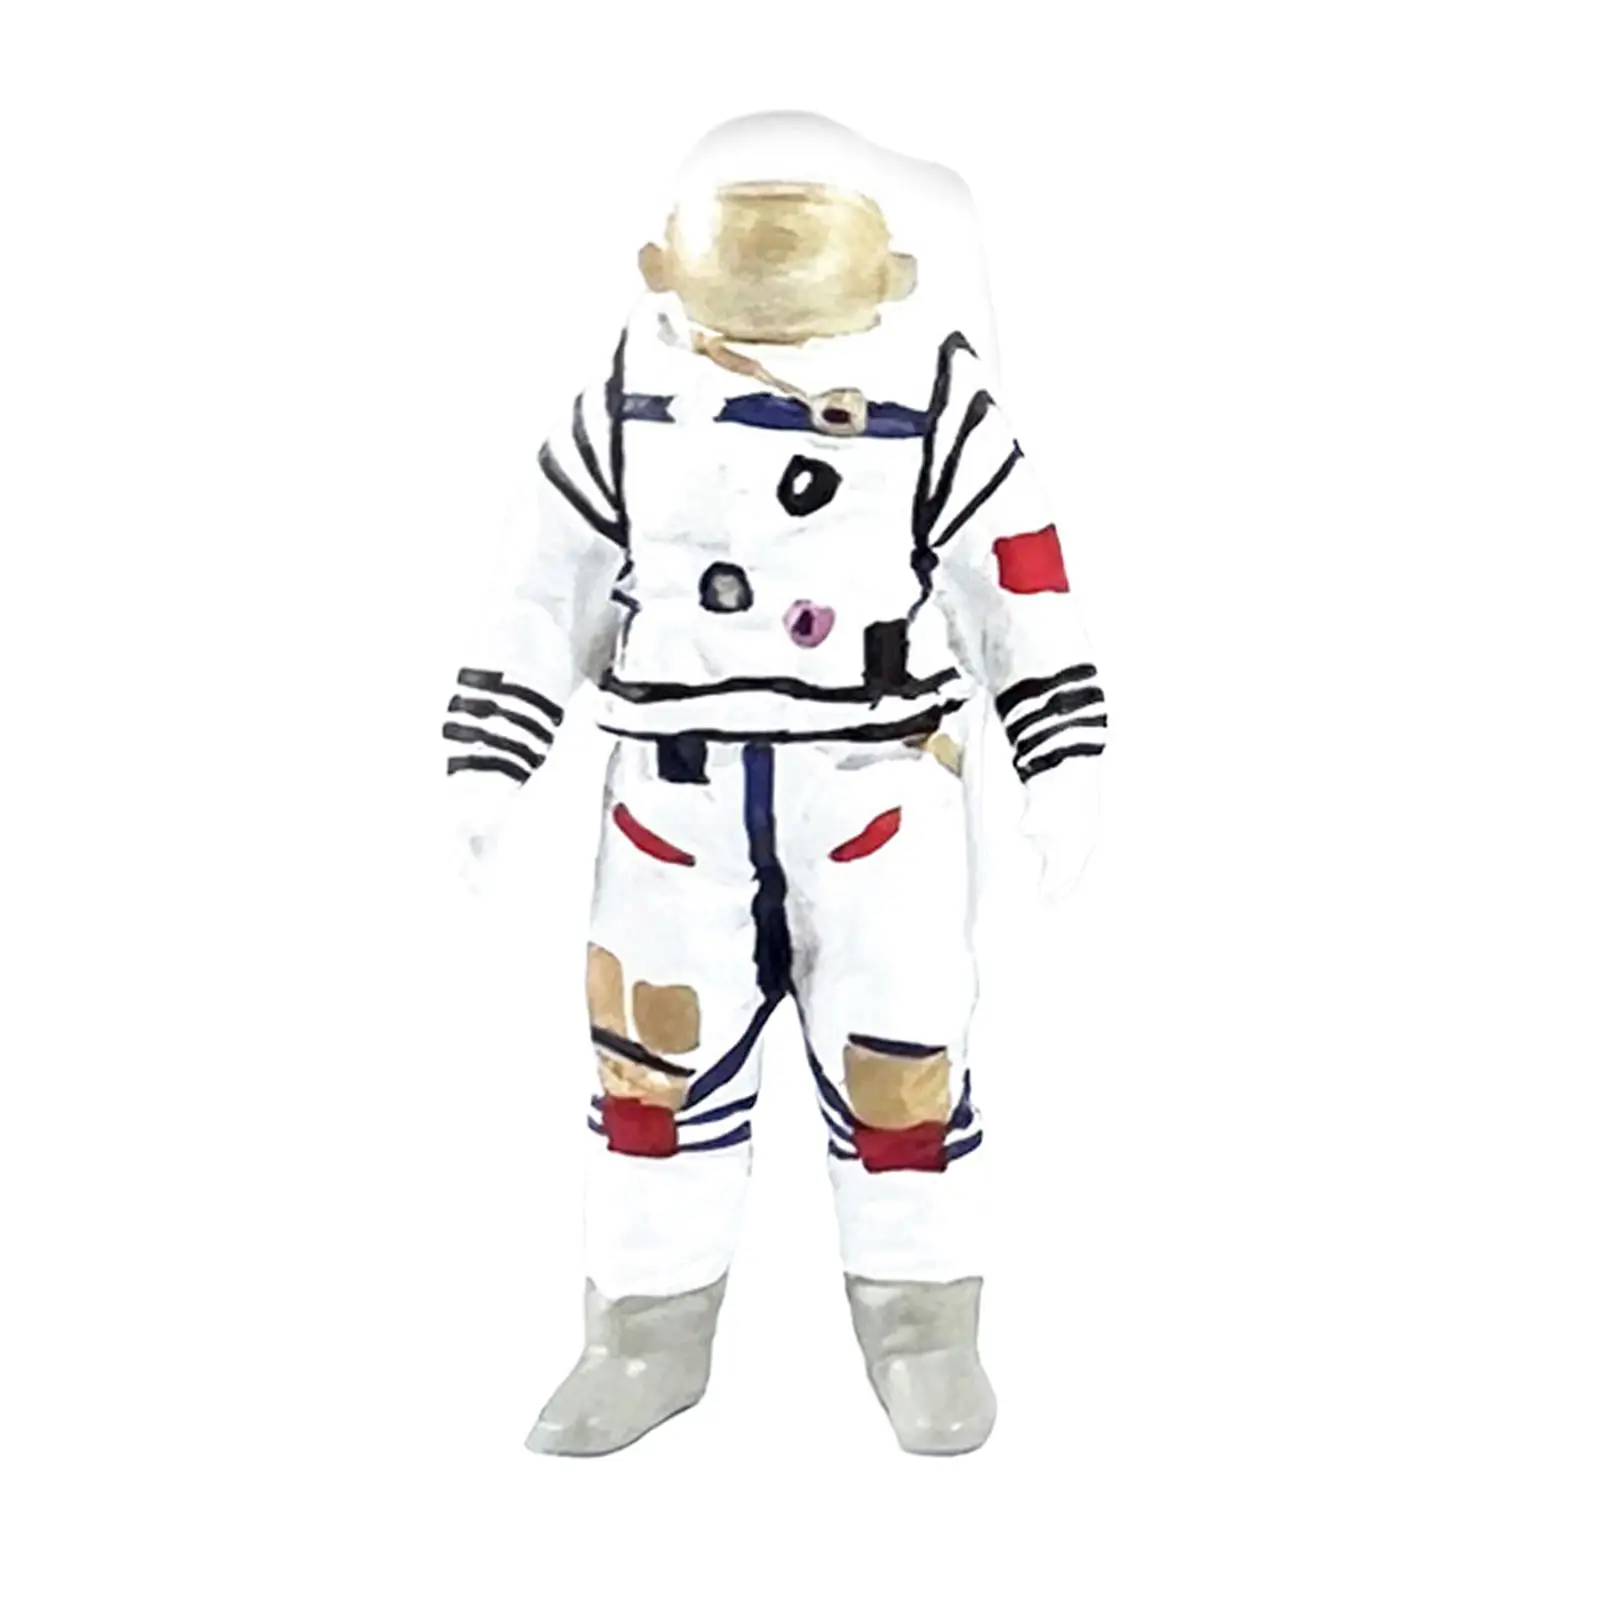 1/64 Scale Astronaut Figurines Sand Table Ornament Collection Spaceman Model for Diorama DIY Scene Party Favor Dollhouse Decor